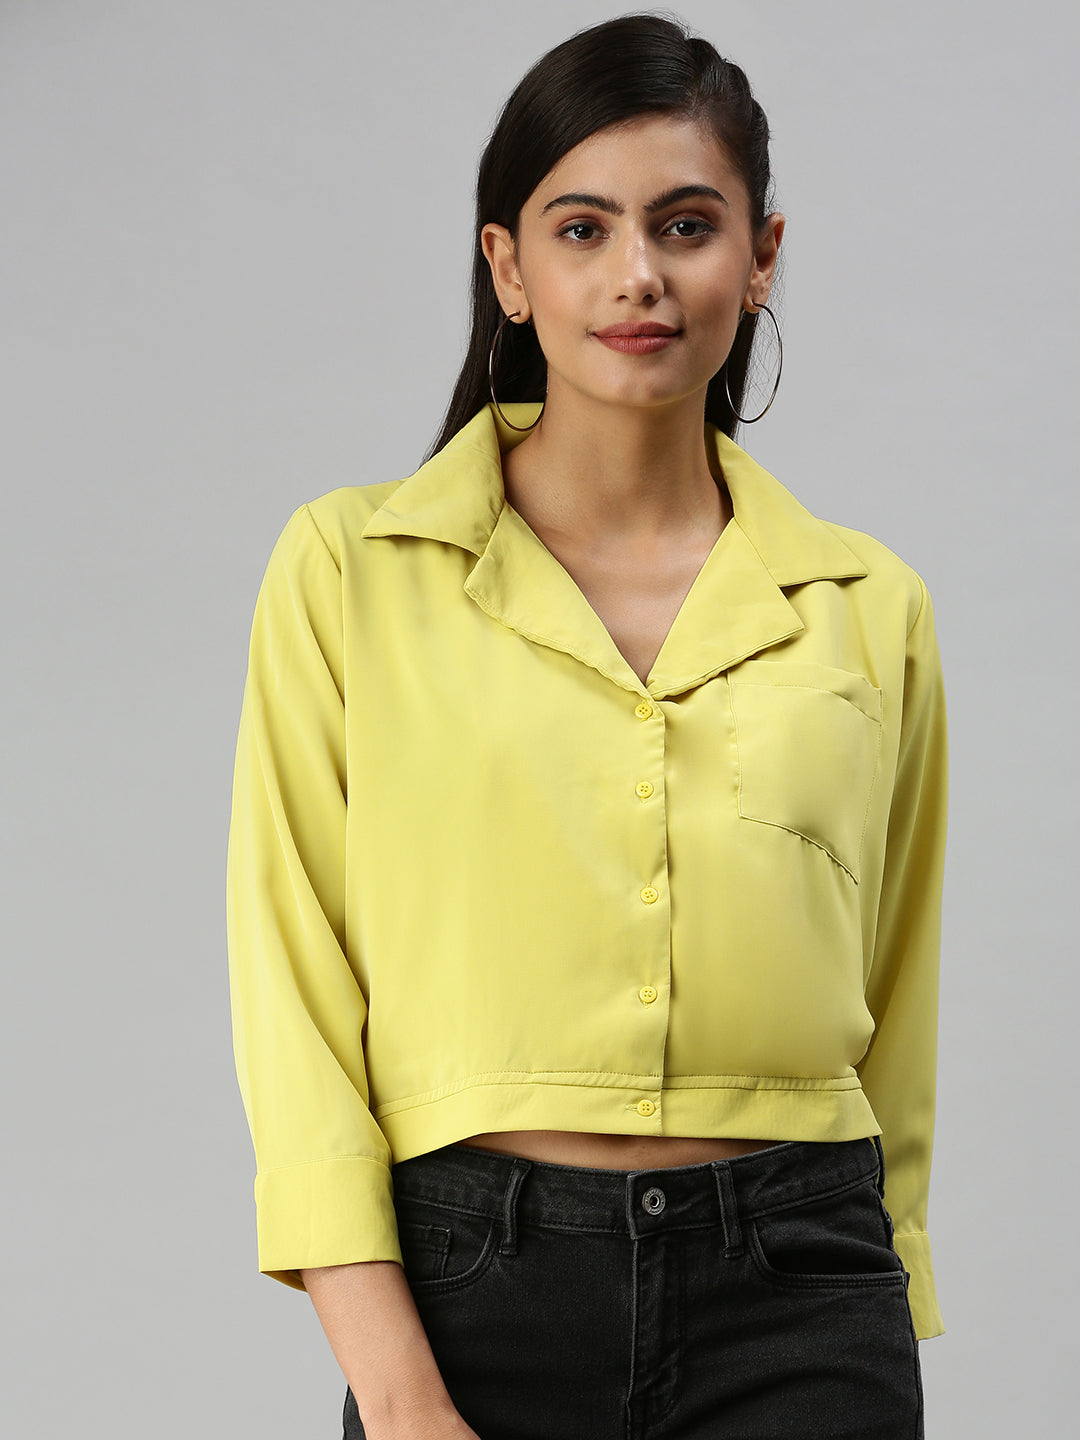 Women's Lime Green Solid Top